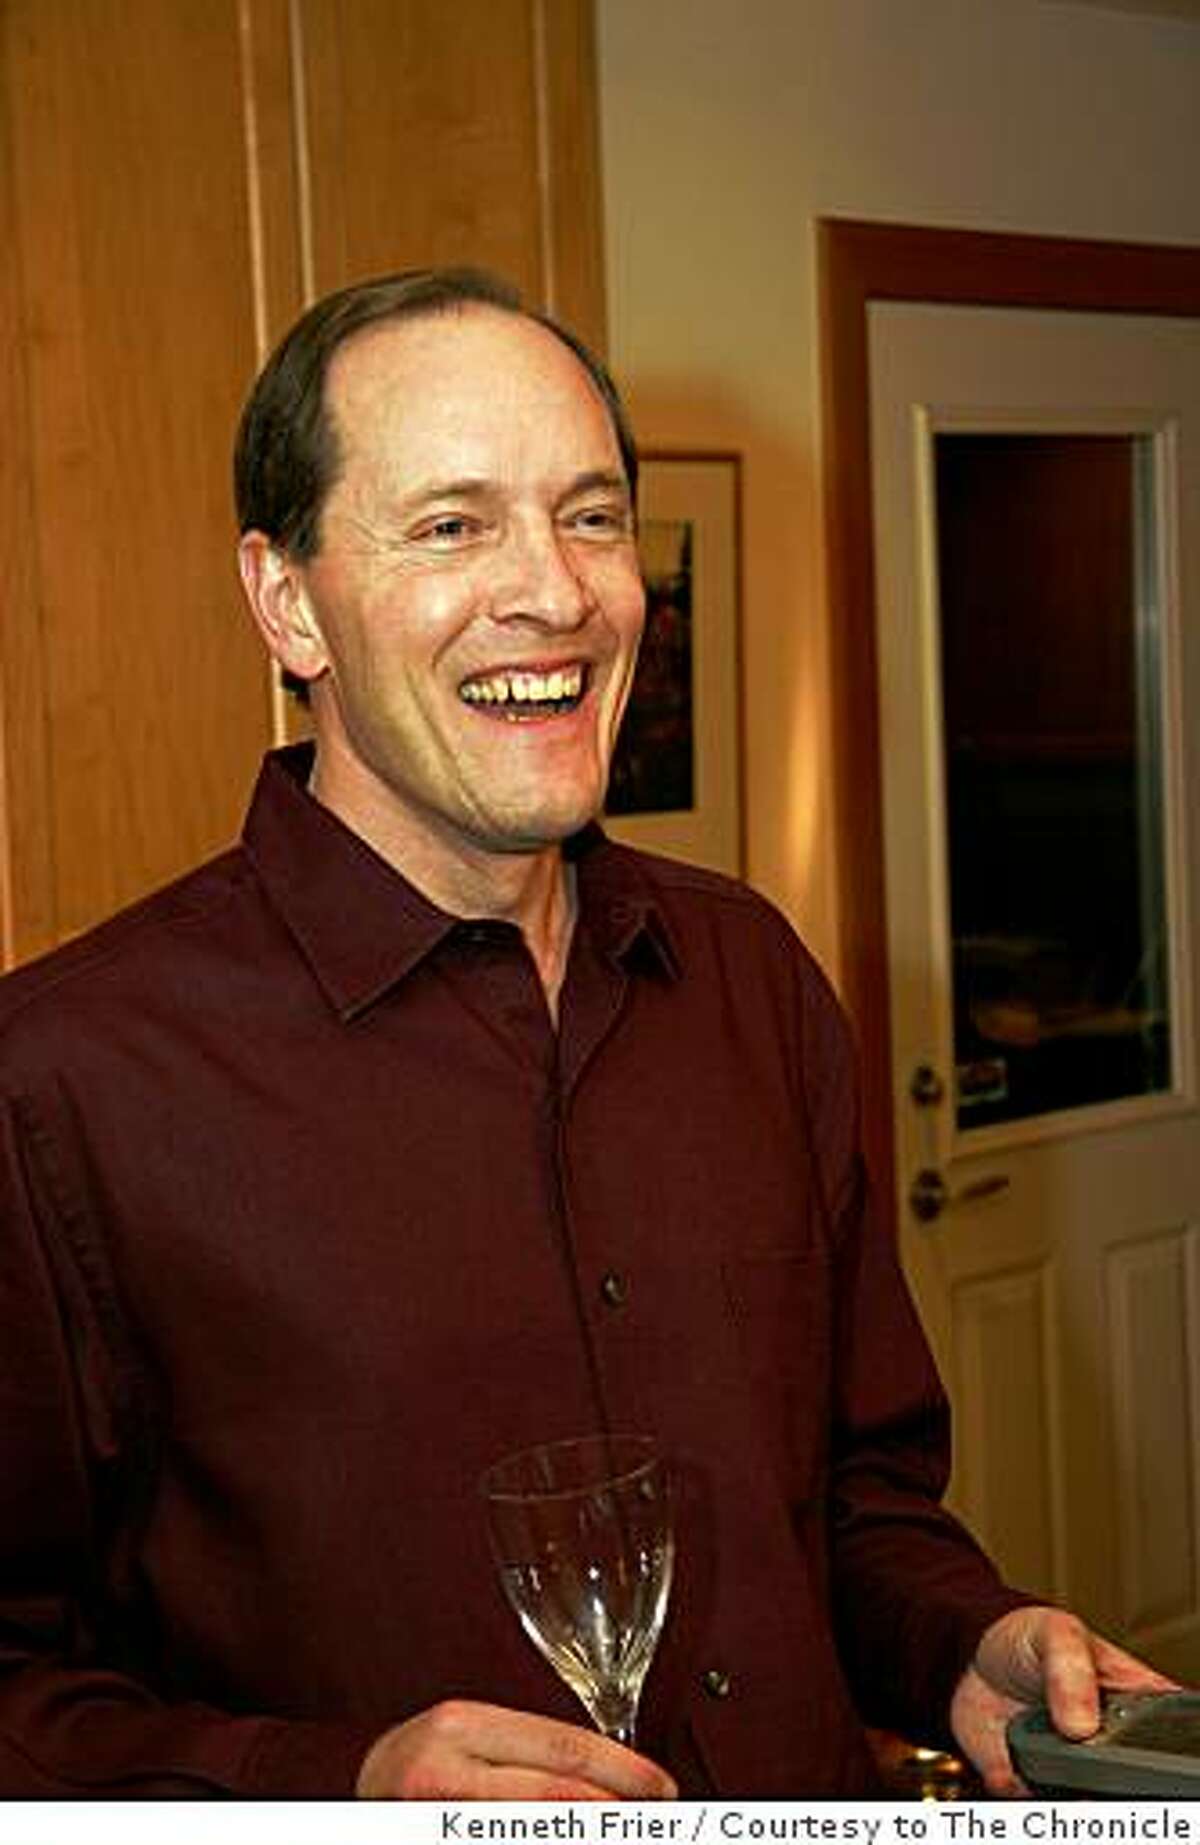 Eric Von der Porten, who ran a small, San Carlos-based investment fund, killed himself on Dec. 2, 2008. This picture was taken of him by a friend at his 50th birthday party on Dec. 31, 2007. Family members say the downturn in the nation's economy was one force pushing him to suicide.